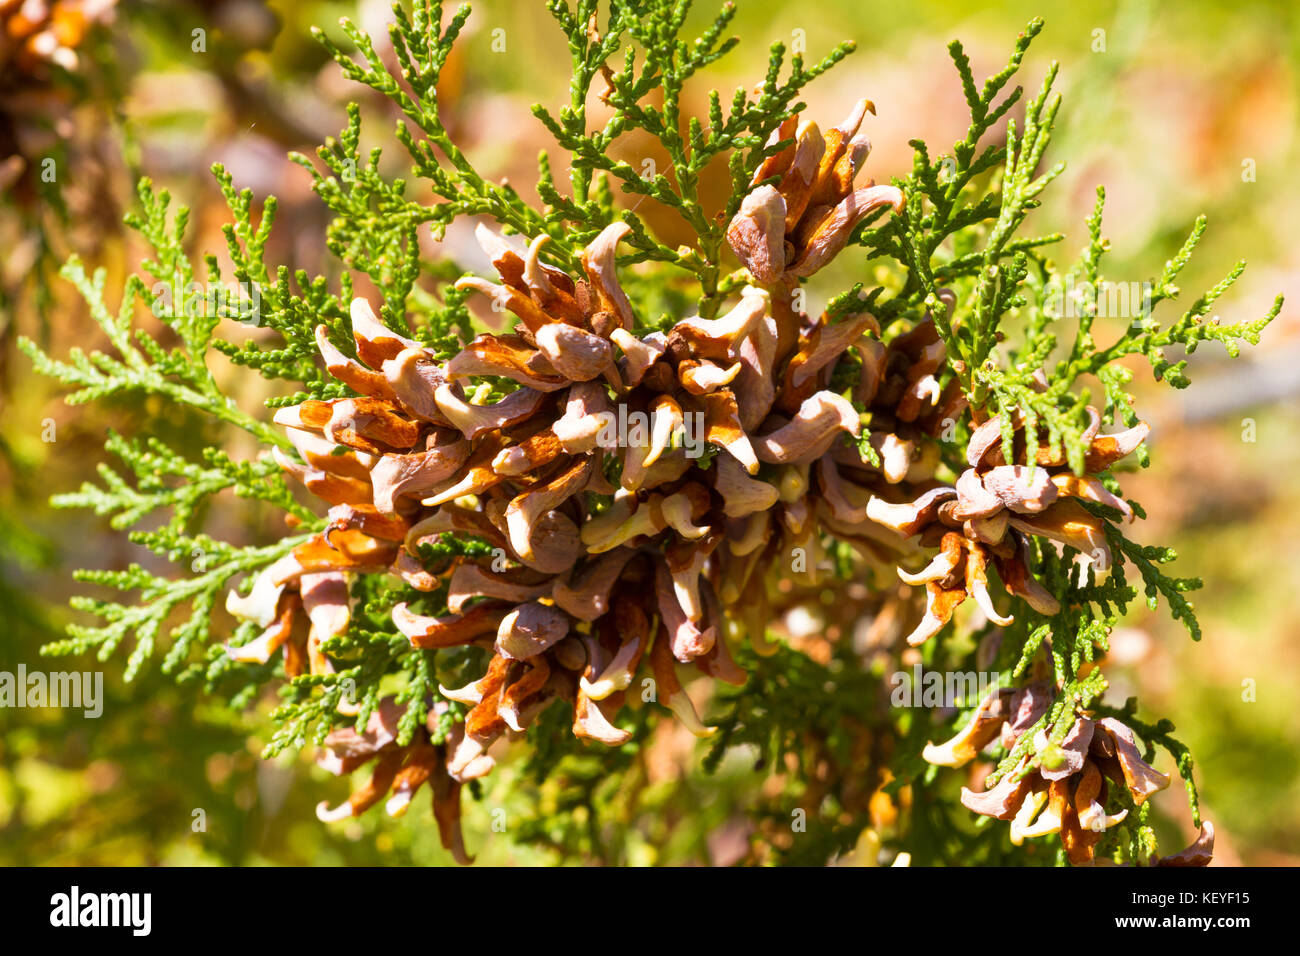 Brunch of thuya with cones. Thuja part of tree. Conifer Stock Photo